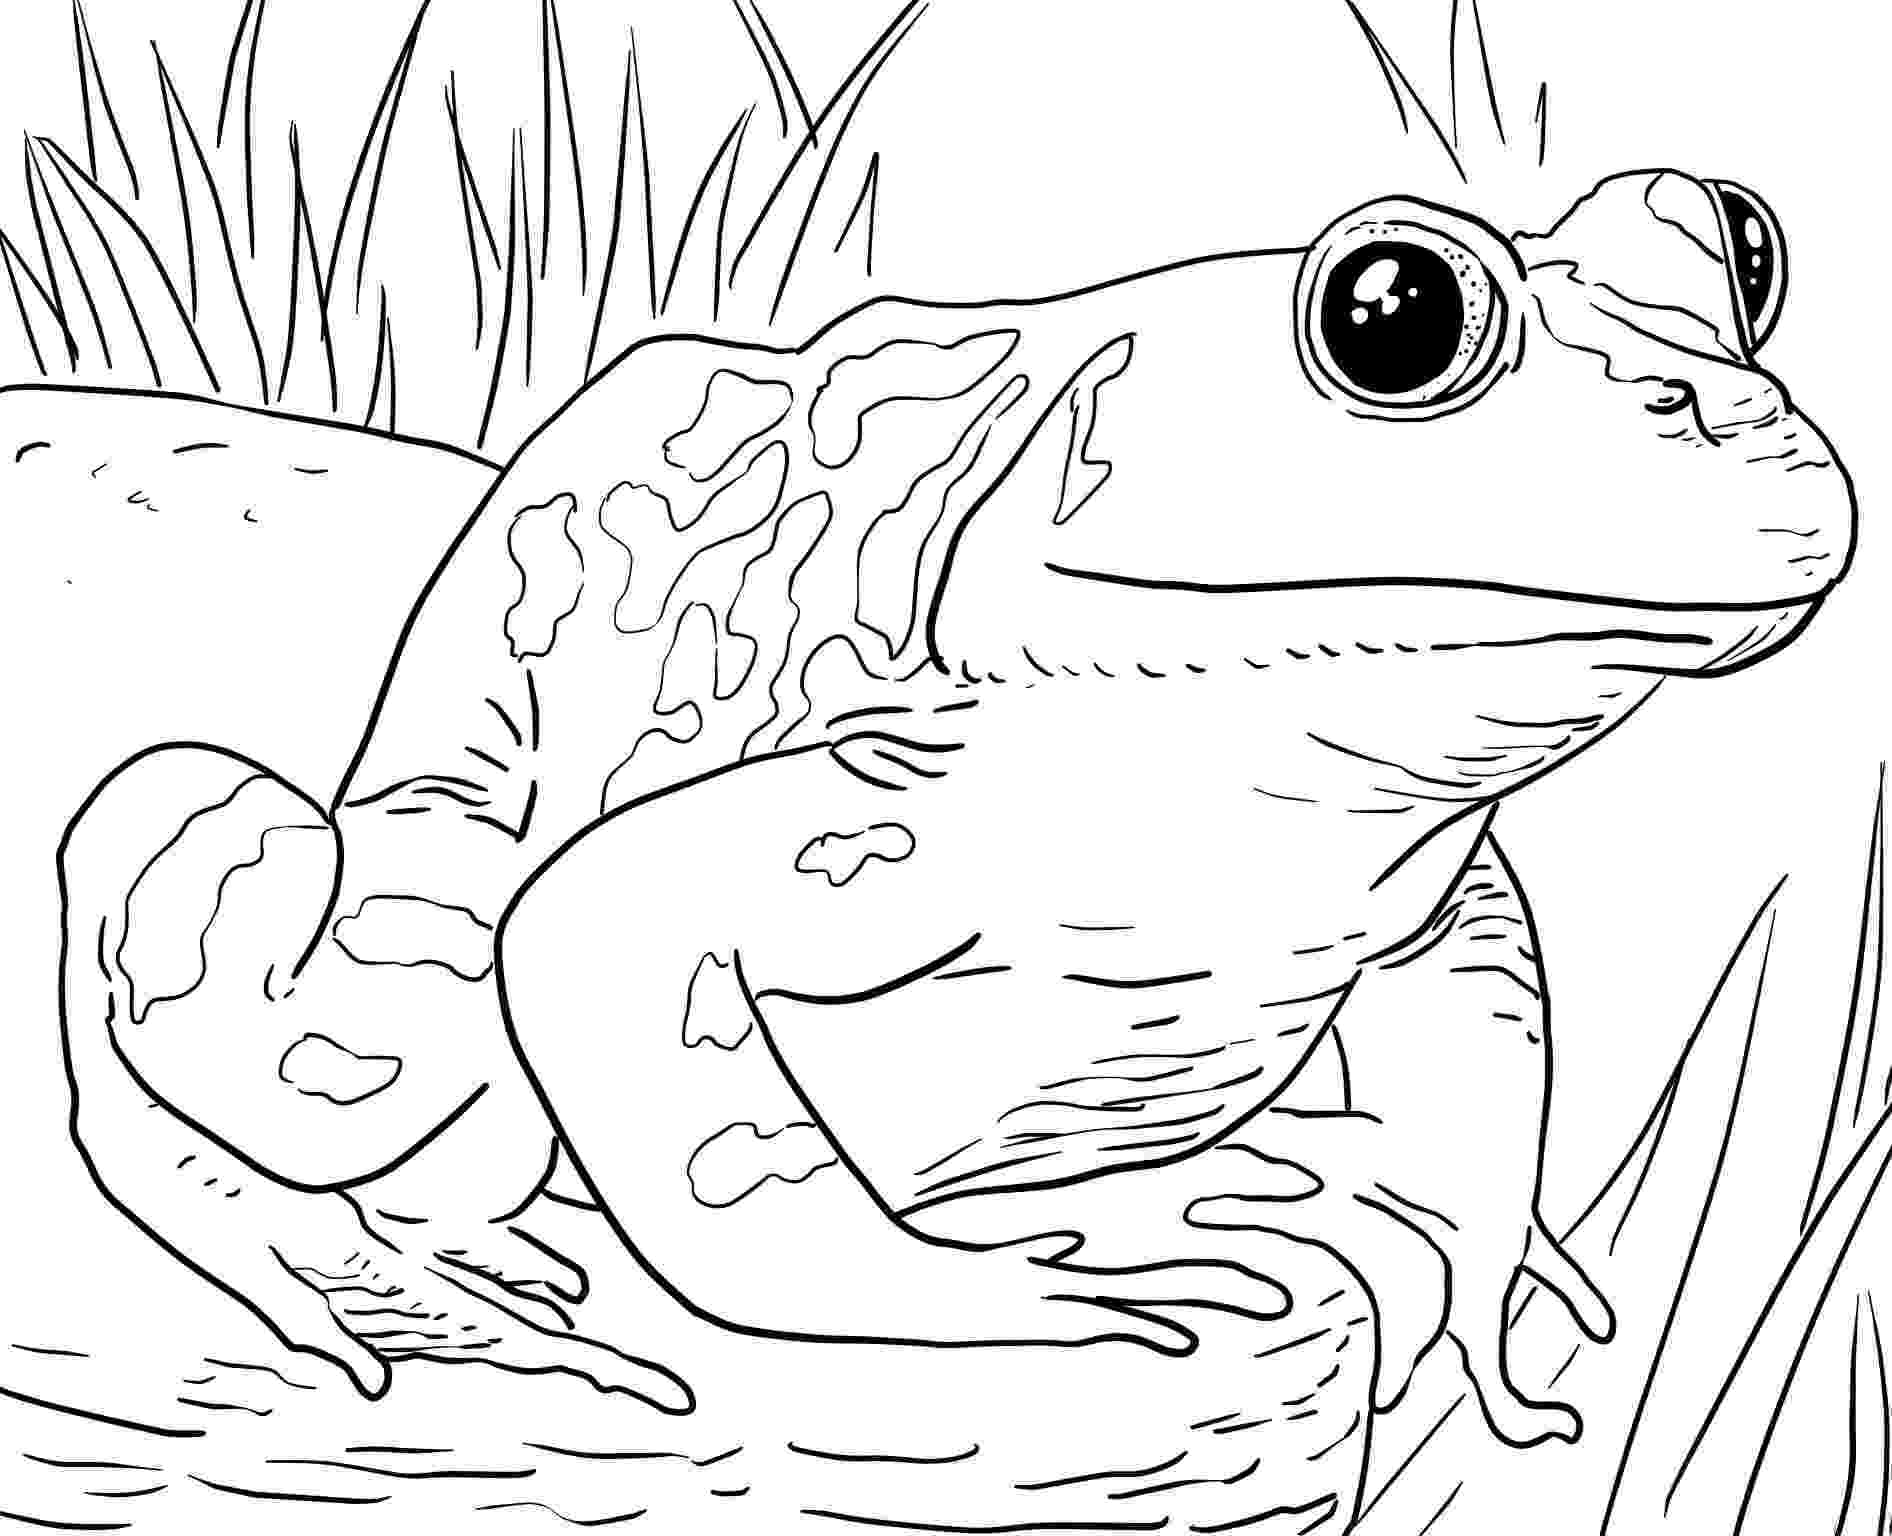 zoo animal coloring pictures zoo animals coloring pages get coloring pages pictures zoo animal coloring 